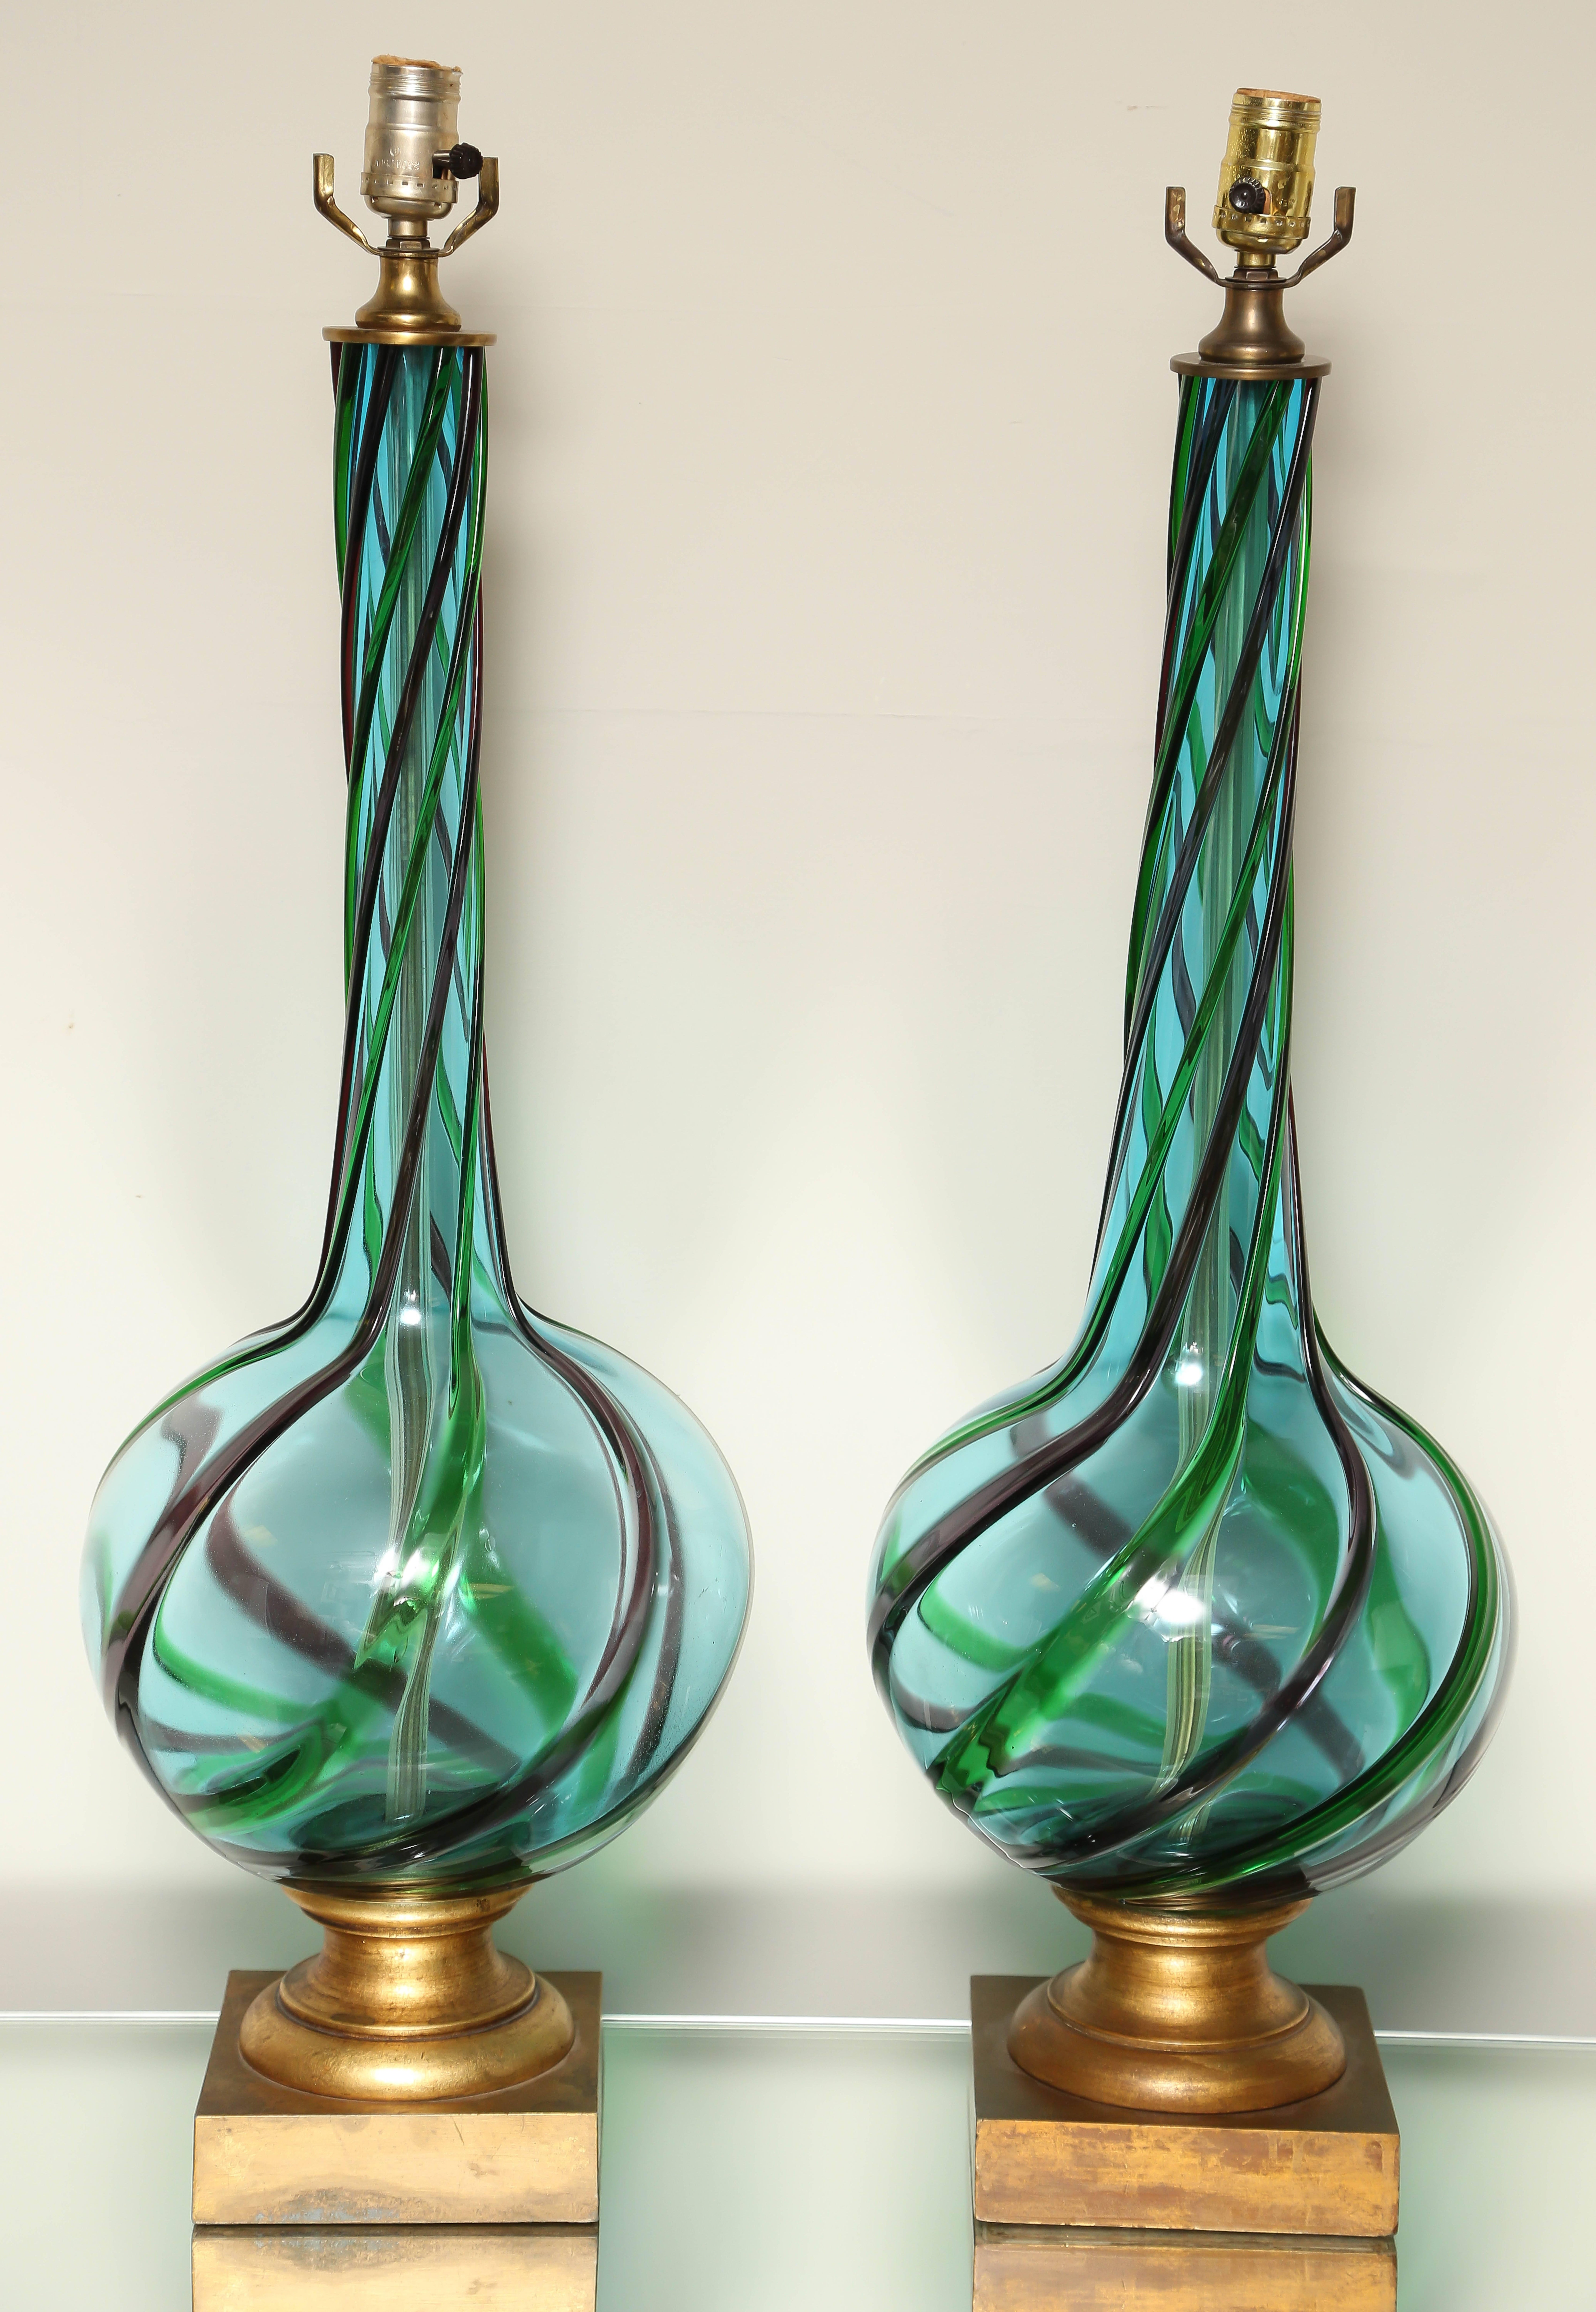 An unusual aqua blue colored pair of Mid-Century lamps with applied rods mounted on giltwood bases.